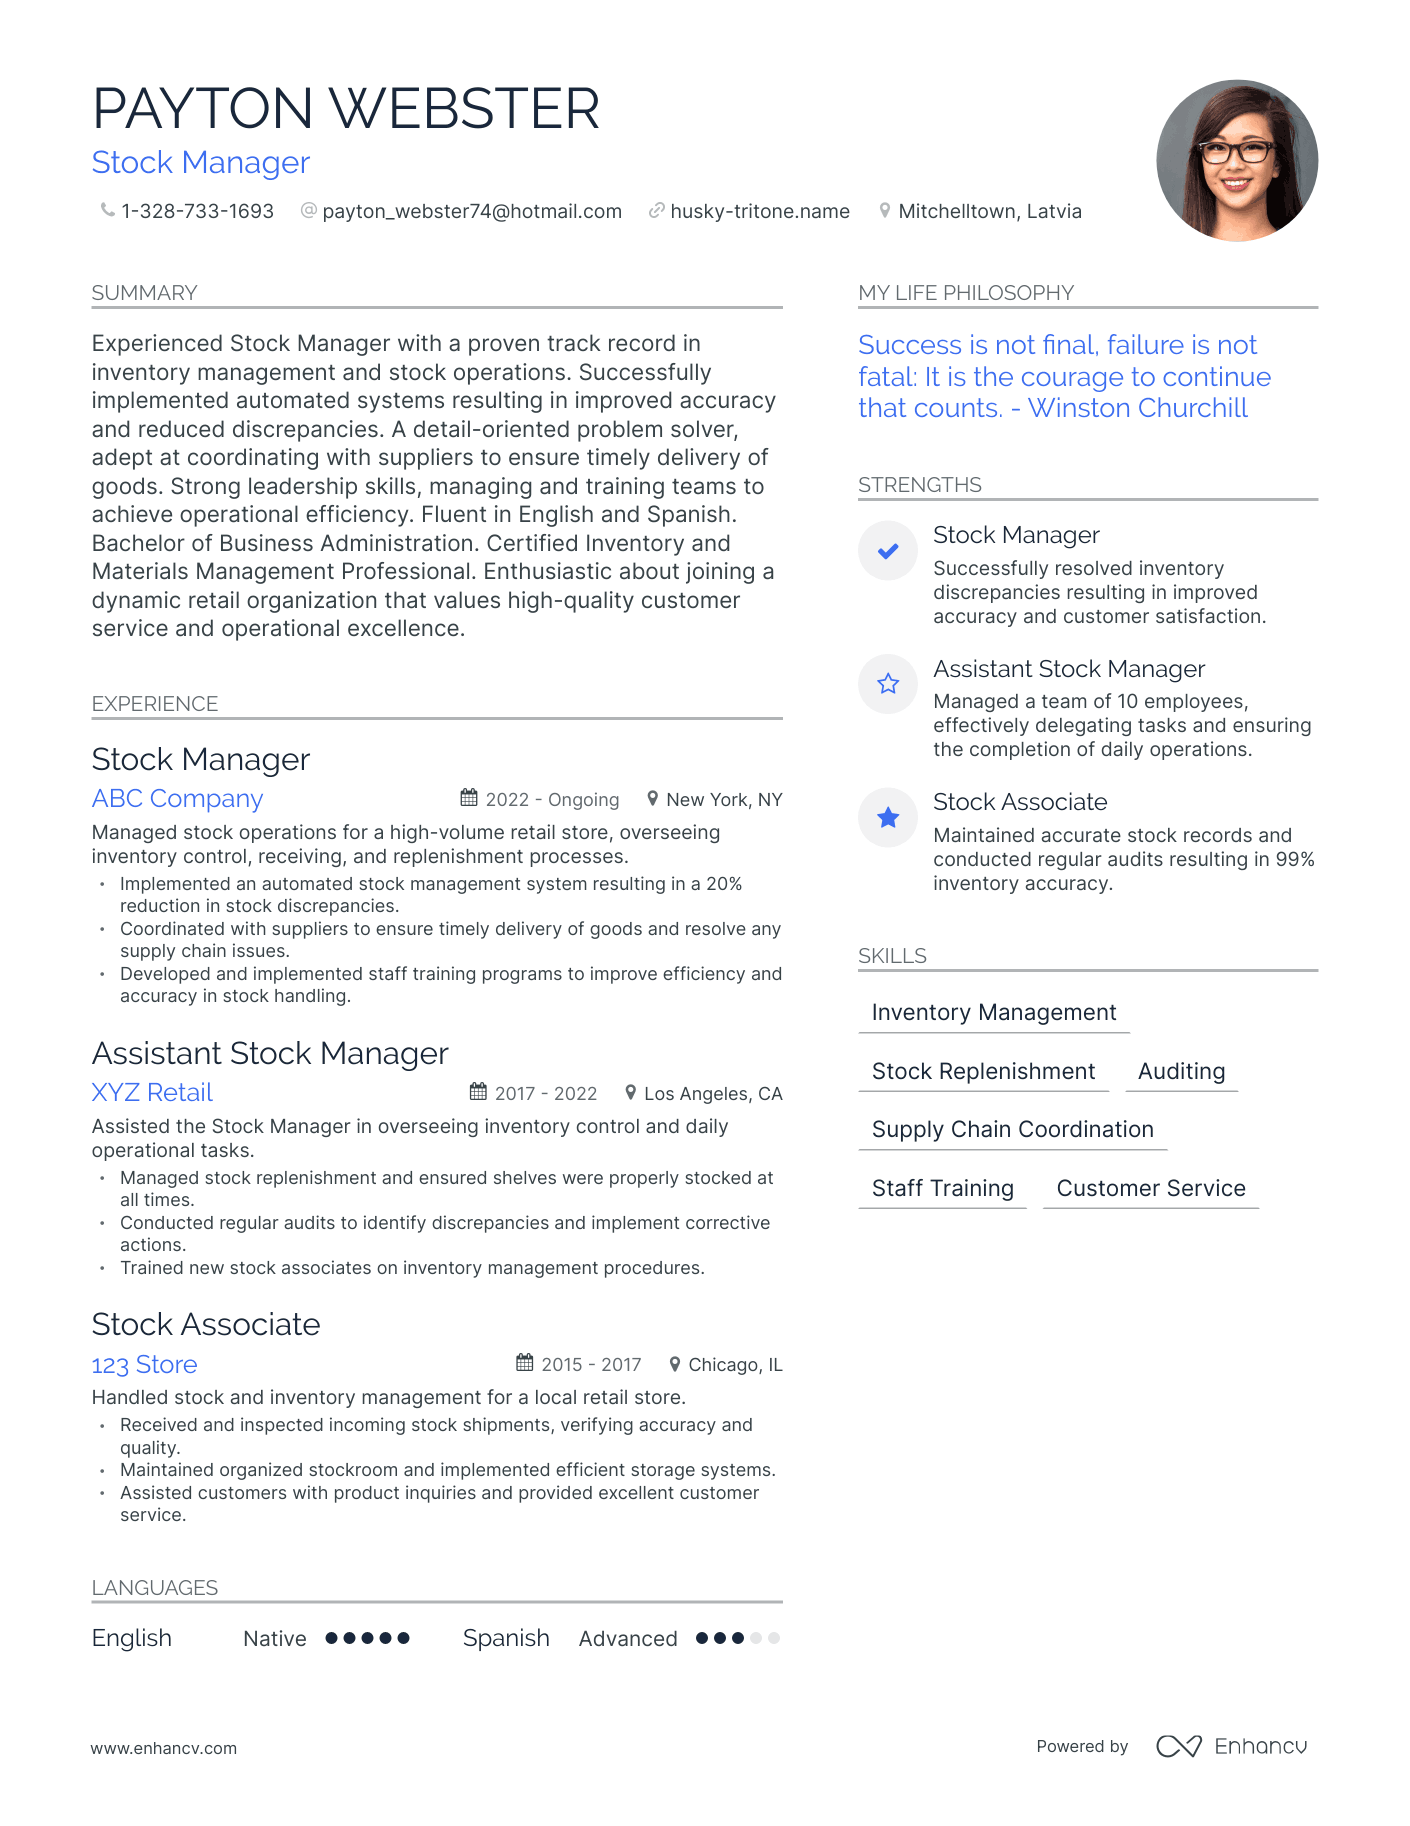 Stock Manager resume example